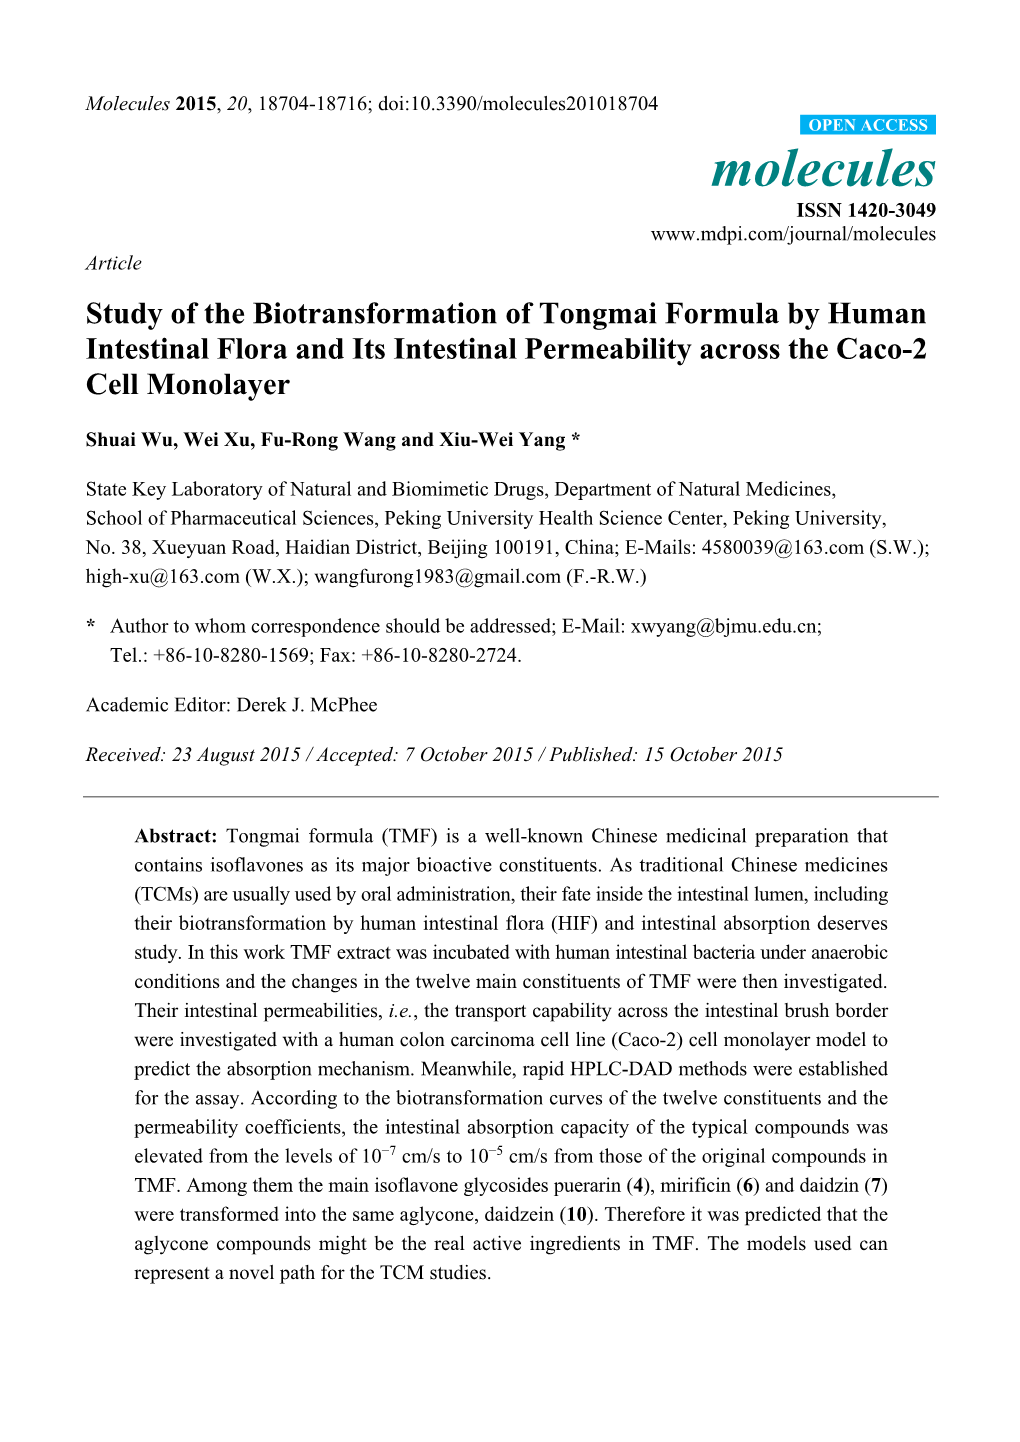 Study of the Biotransformation of Tongmai Formula by Human Intestinal Flora and Its Intestinal Permeability Across the Caco-2 Cell Monolayer